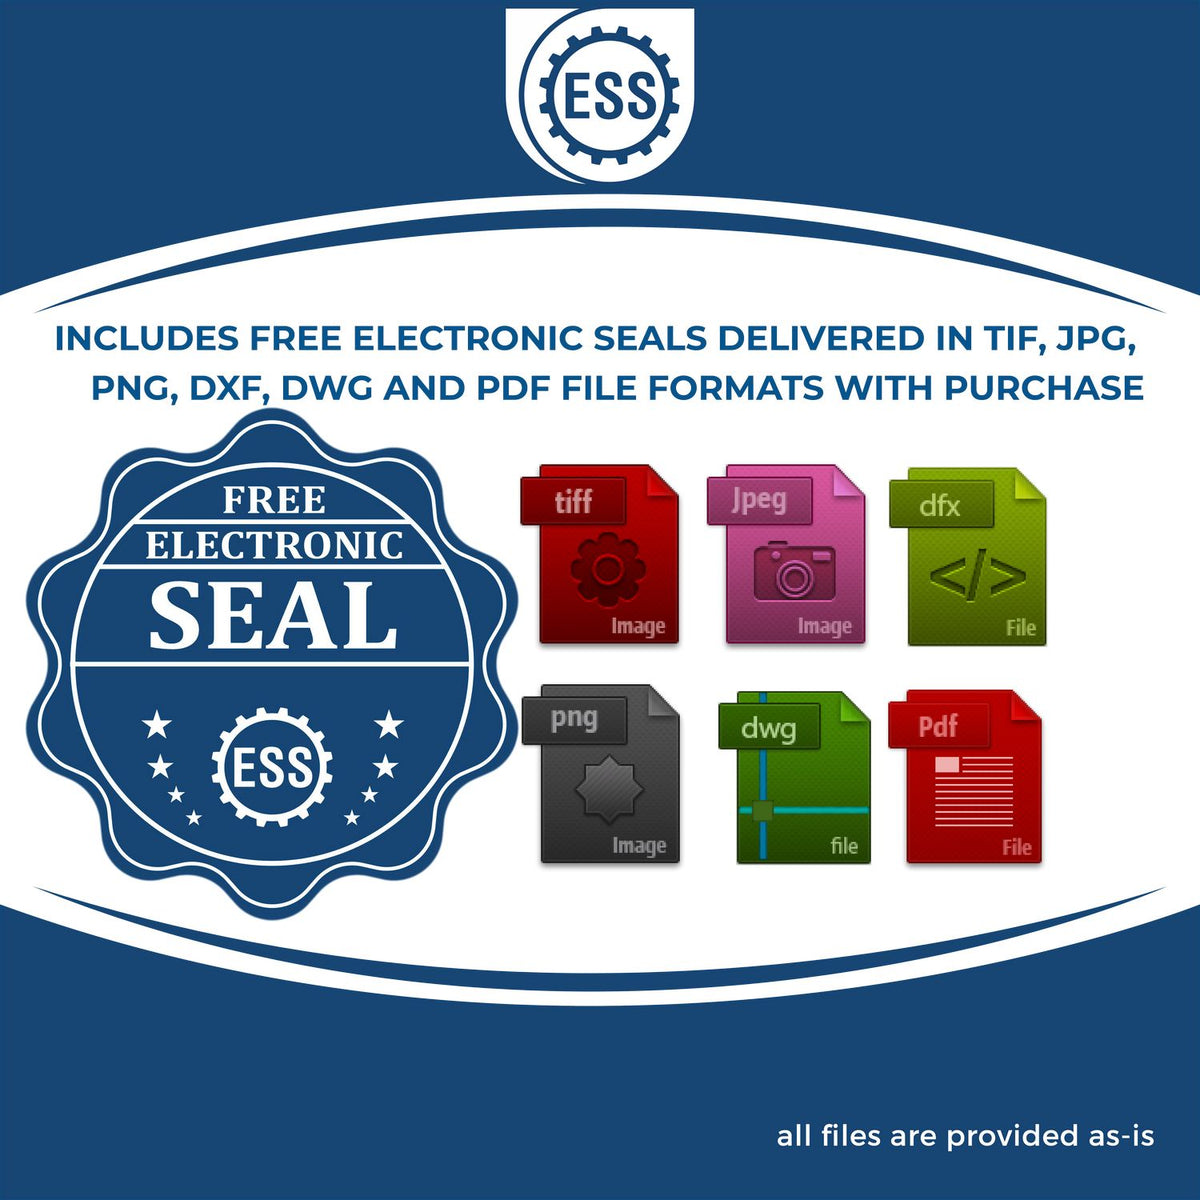 An infographic for the free electronic seal for the Slim Pre-Inked Nebraska Professional Engineer Seal Stamp illustrating the different file type icons such as DXF, DWG, TIF, JPG and PNG.